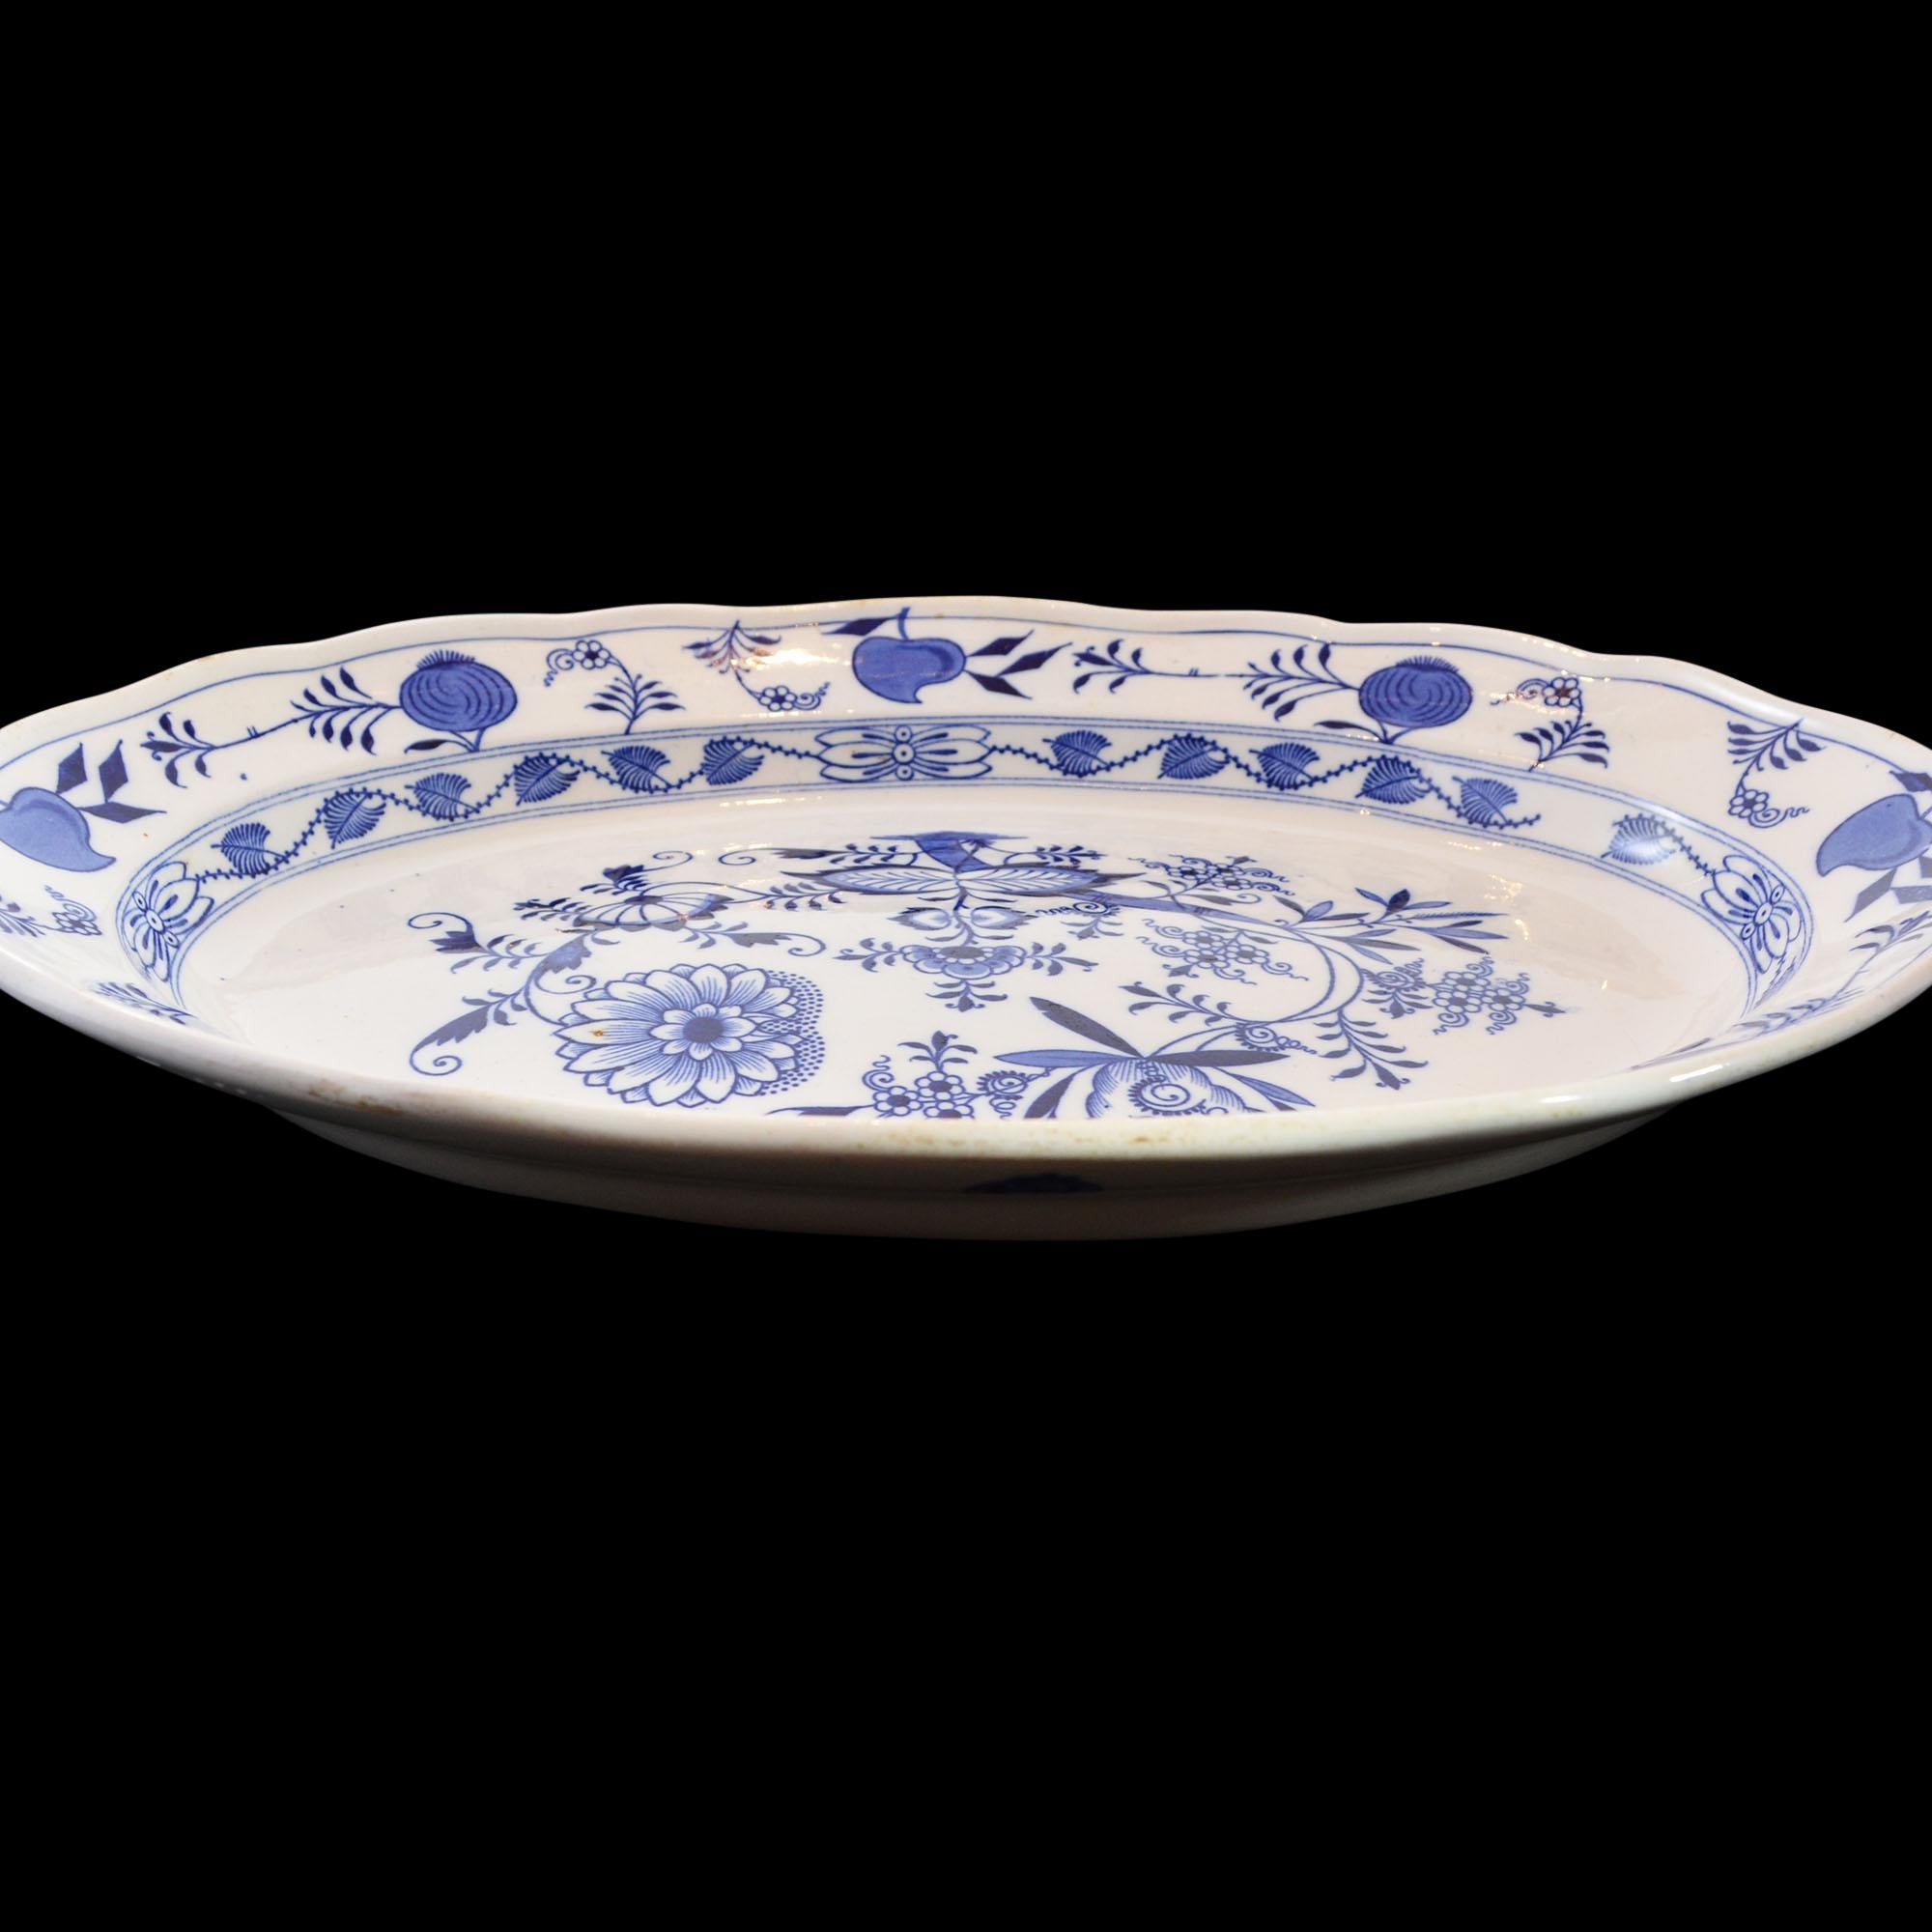 This large platter has the classic Meissen blue onion design. The manufacturer Brown-Westhead, Moore & Co., operated 1862-1904 in the Staffordshire pottery area. The platter is marked with the maker's mark and the pattern name, MEISSEN. In addition